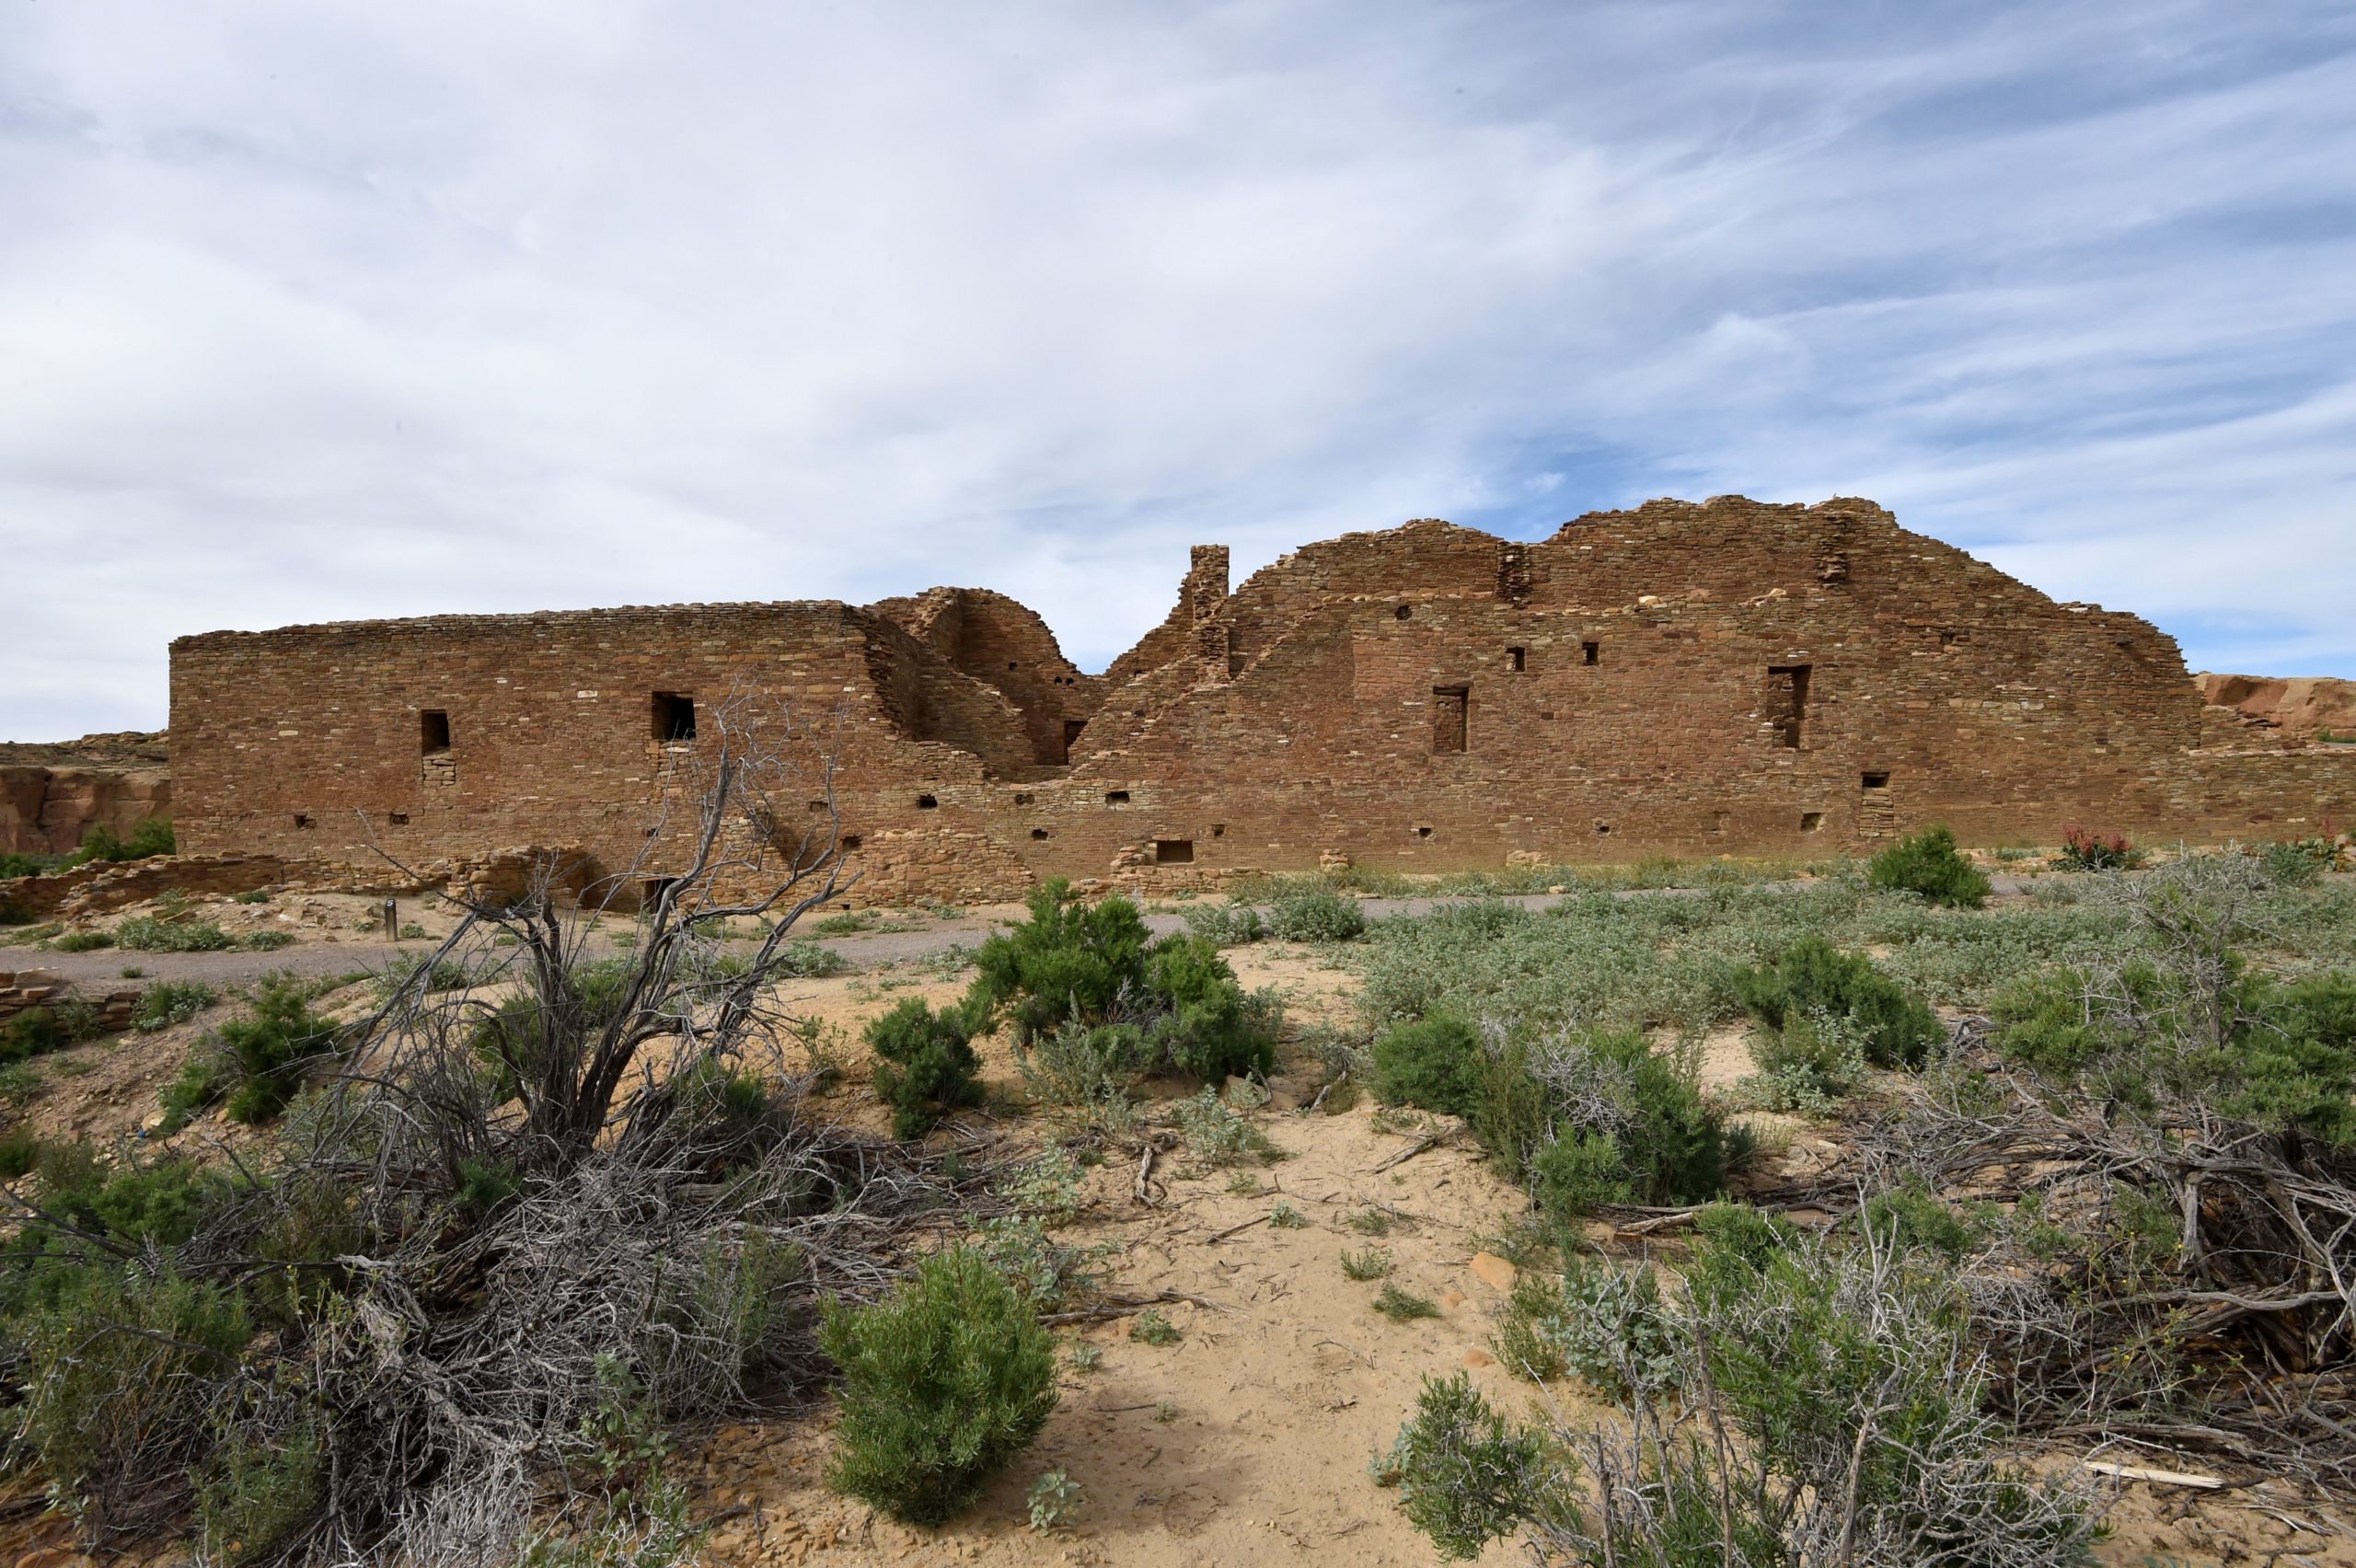 The ruins of the Pueblo del Arroyo house built by Ancient Puebloan People is seen at Chaco Culture National Historical Park on May 20, 2015. (Mladen Antonov/AFP via Getty Images)